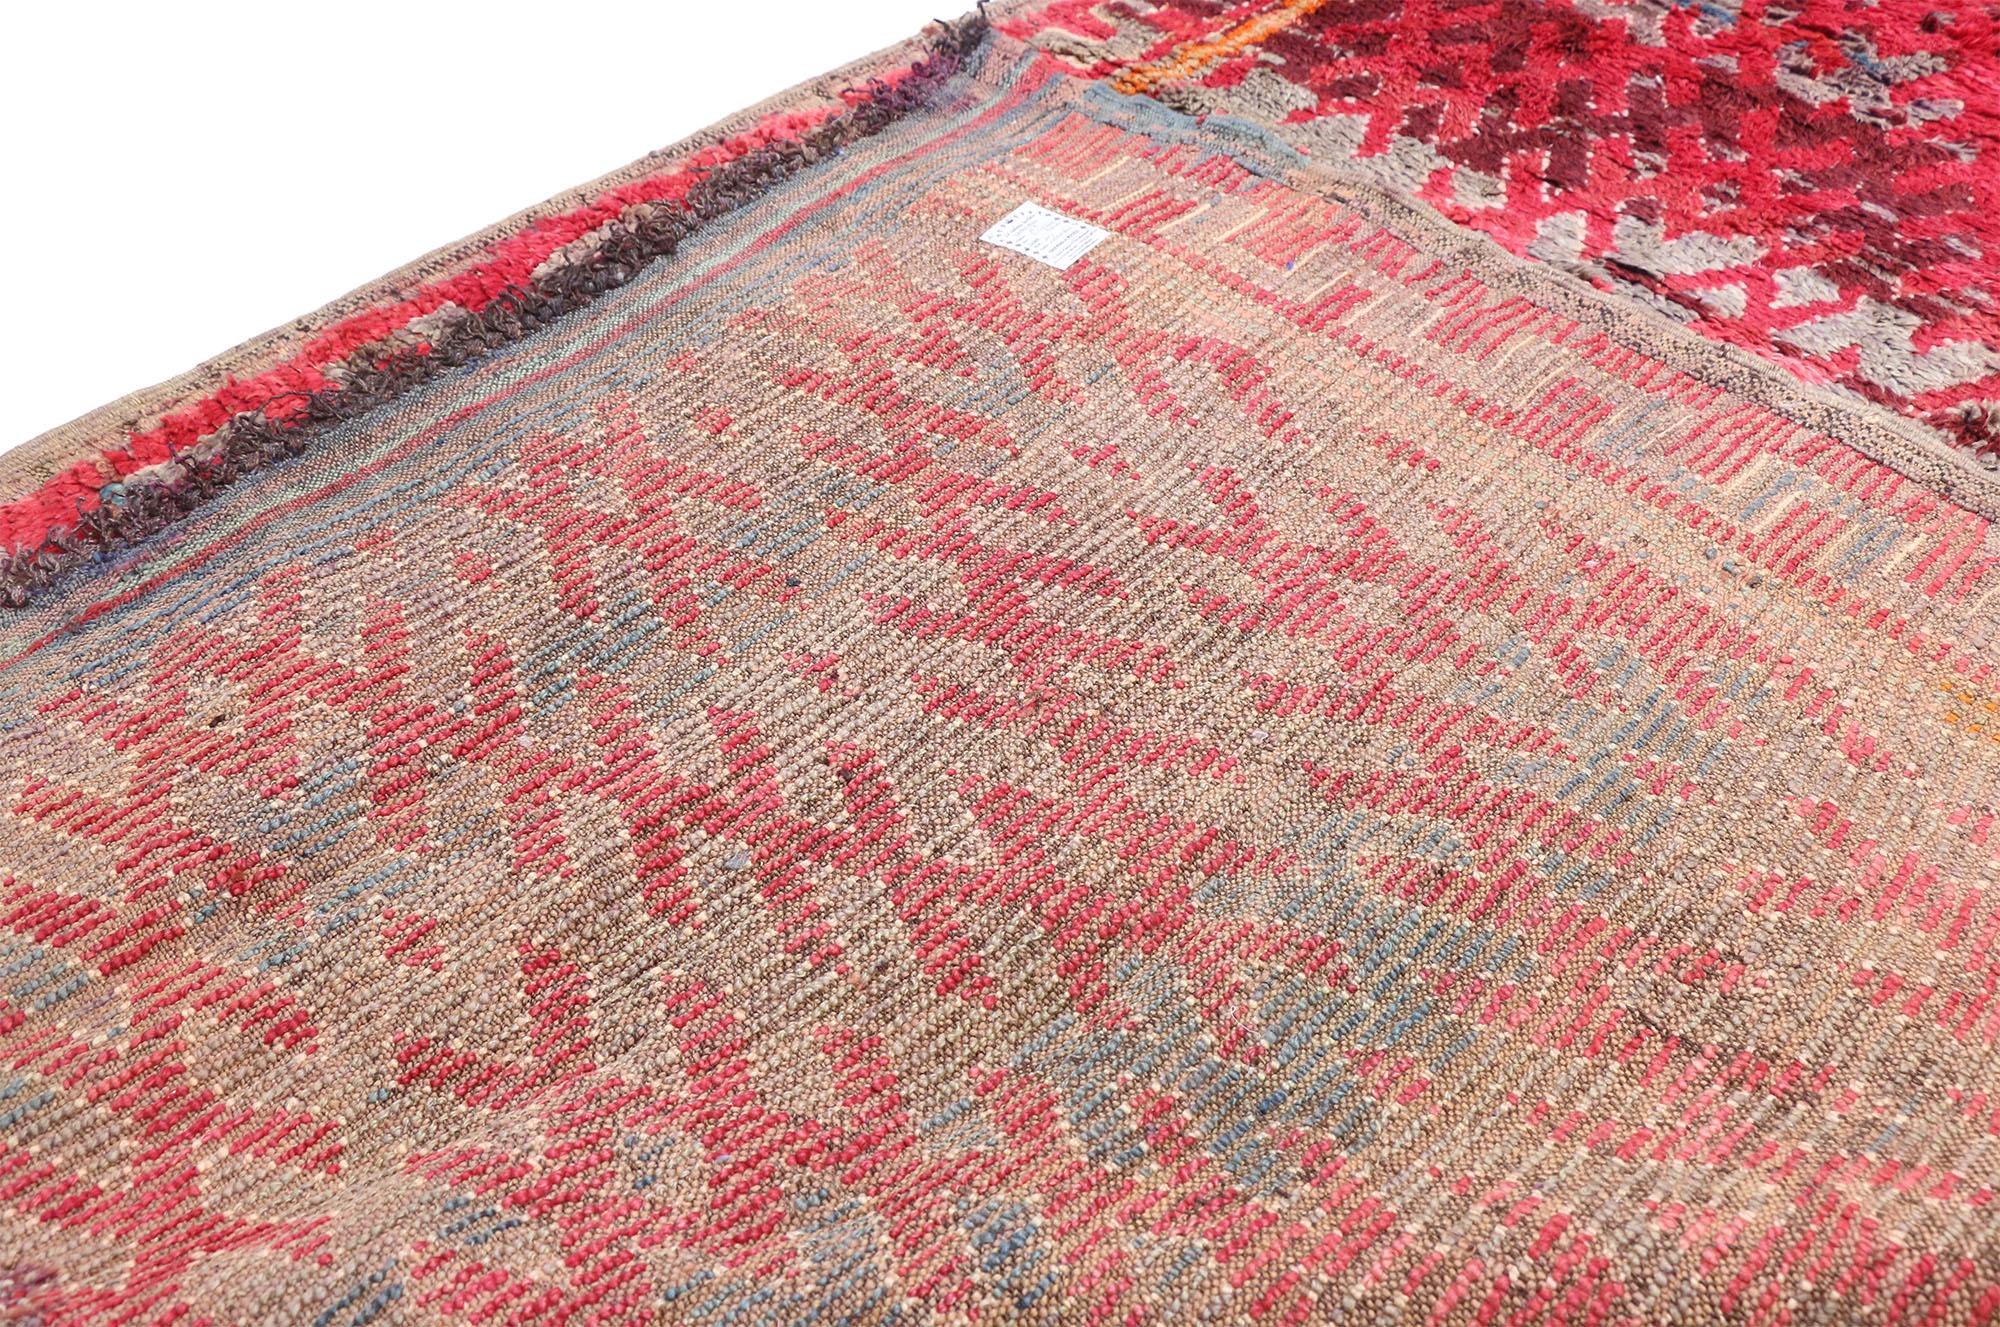 Vintage Moroccan Rug, Berber Moroccan Rug with Vibrant Mid-Century Modern Style 5